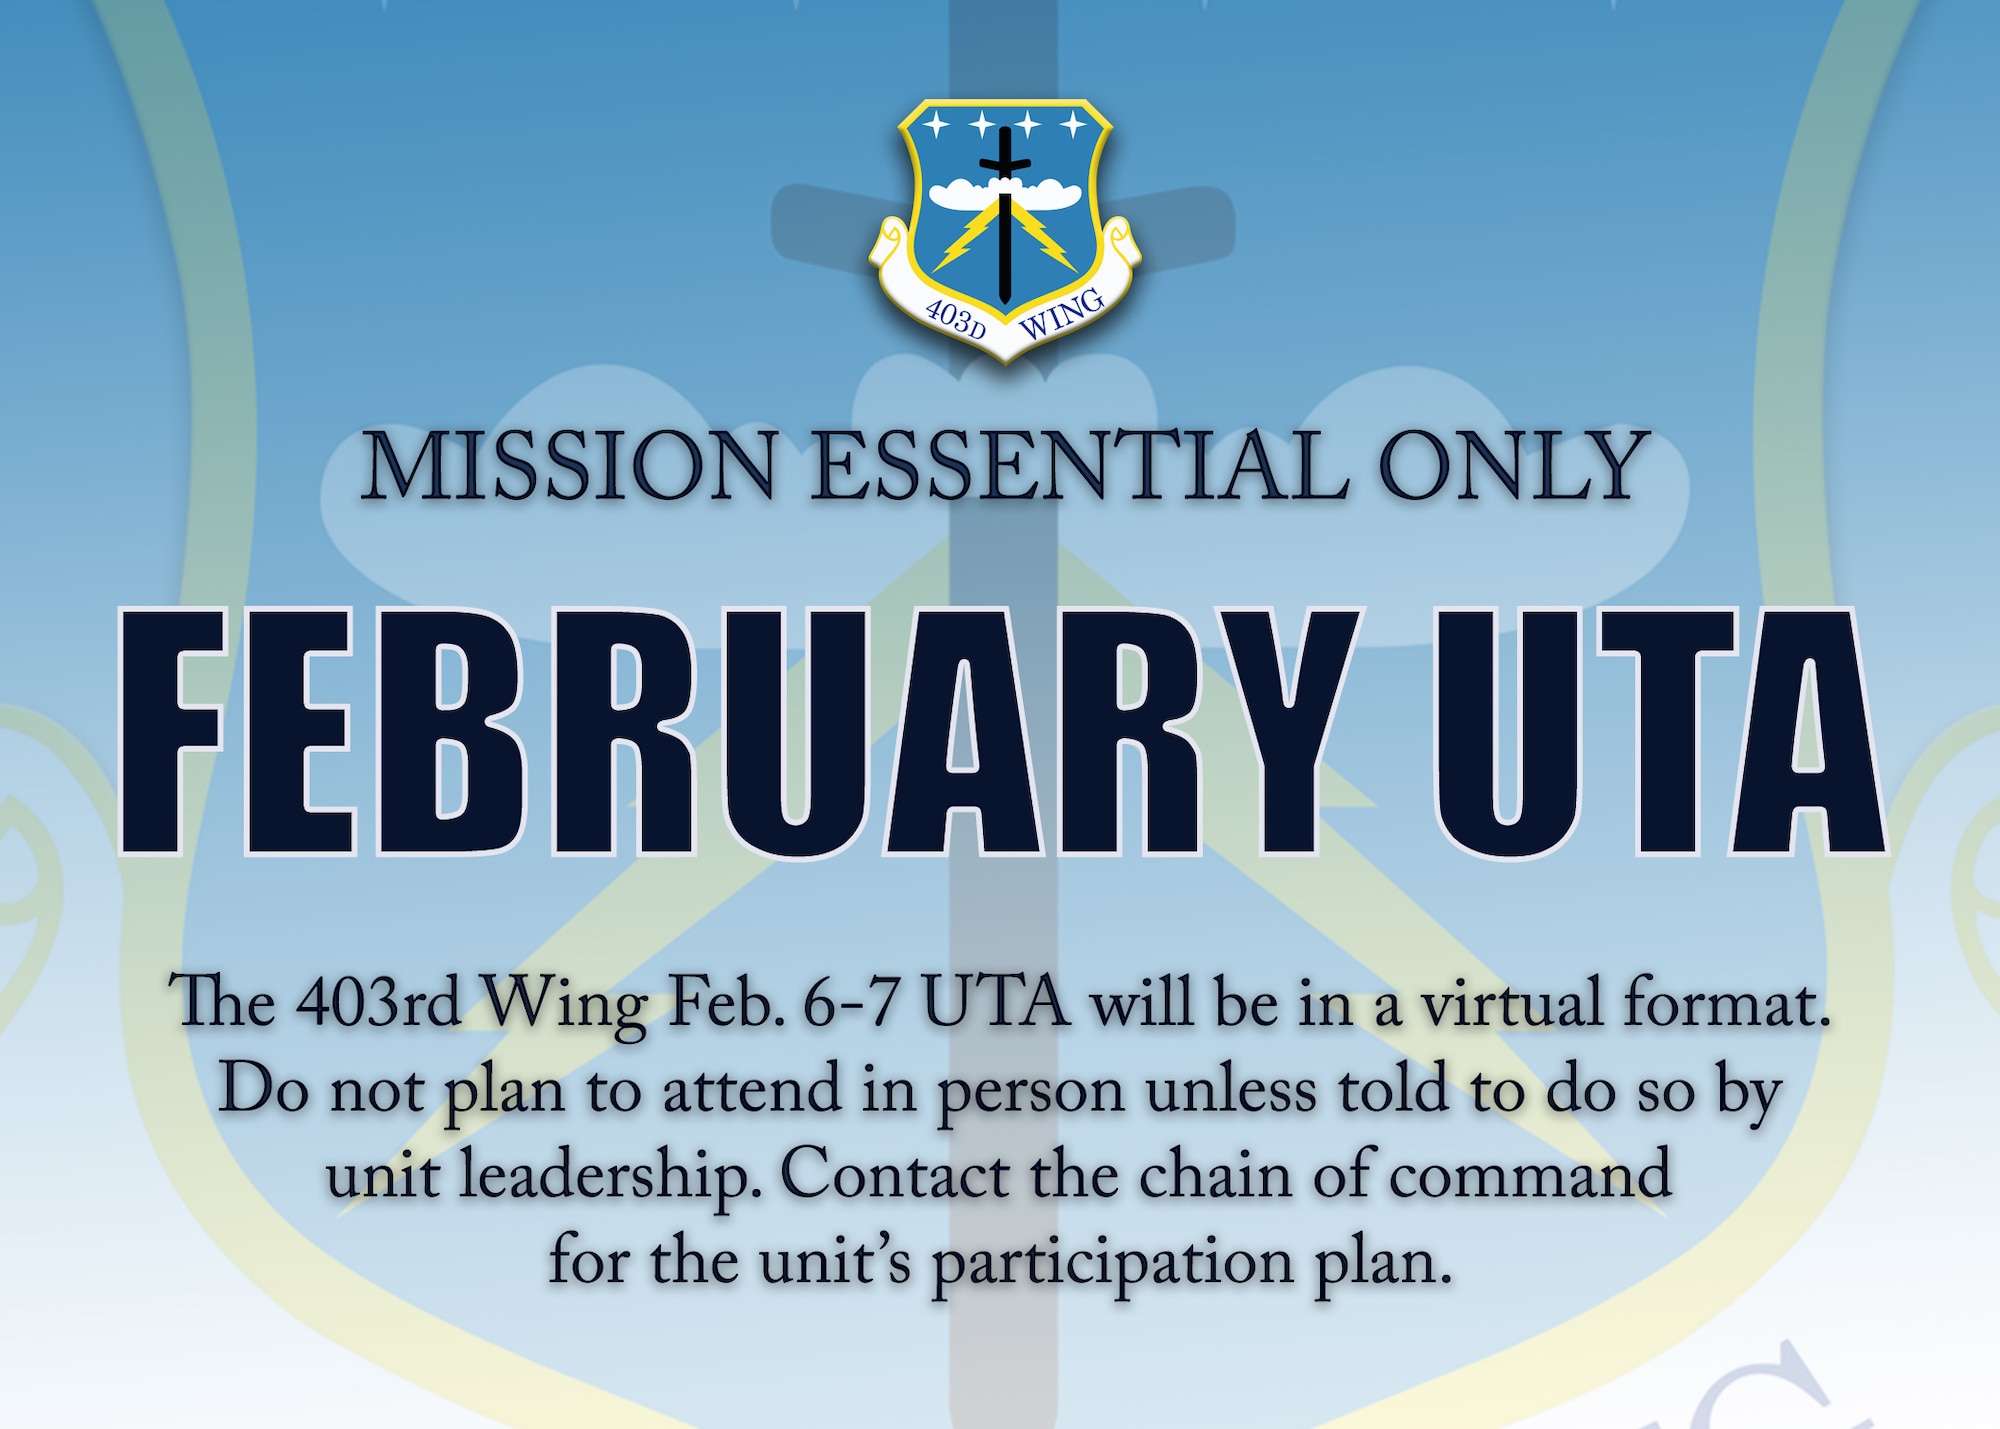 The 403rd Wing Feb. 6-7, 2021, Unit Training Assembly at Keesler Air Force Base, Mississippi, is for mission essential personnel only. Do not plan to attend the UTA in-person unless told to do so by squadron leadership. (U.S. Air Force graphic/Lt. Col. Marnee A.C. Losurdo)